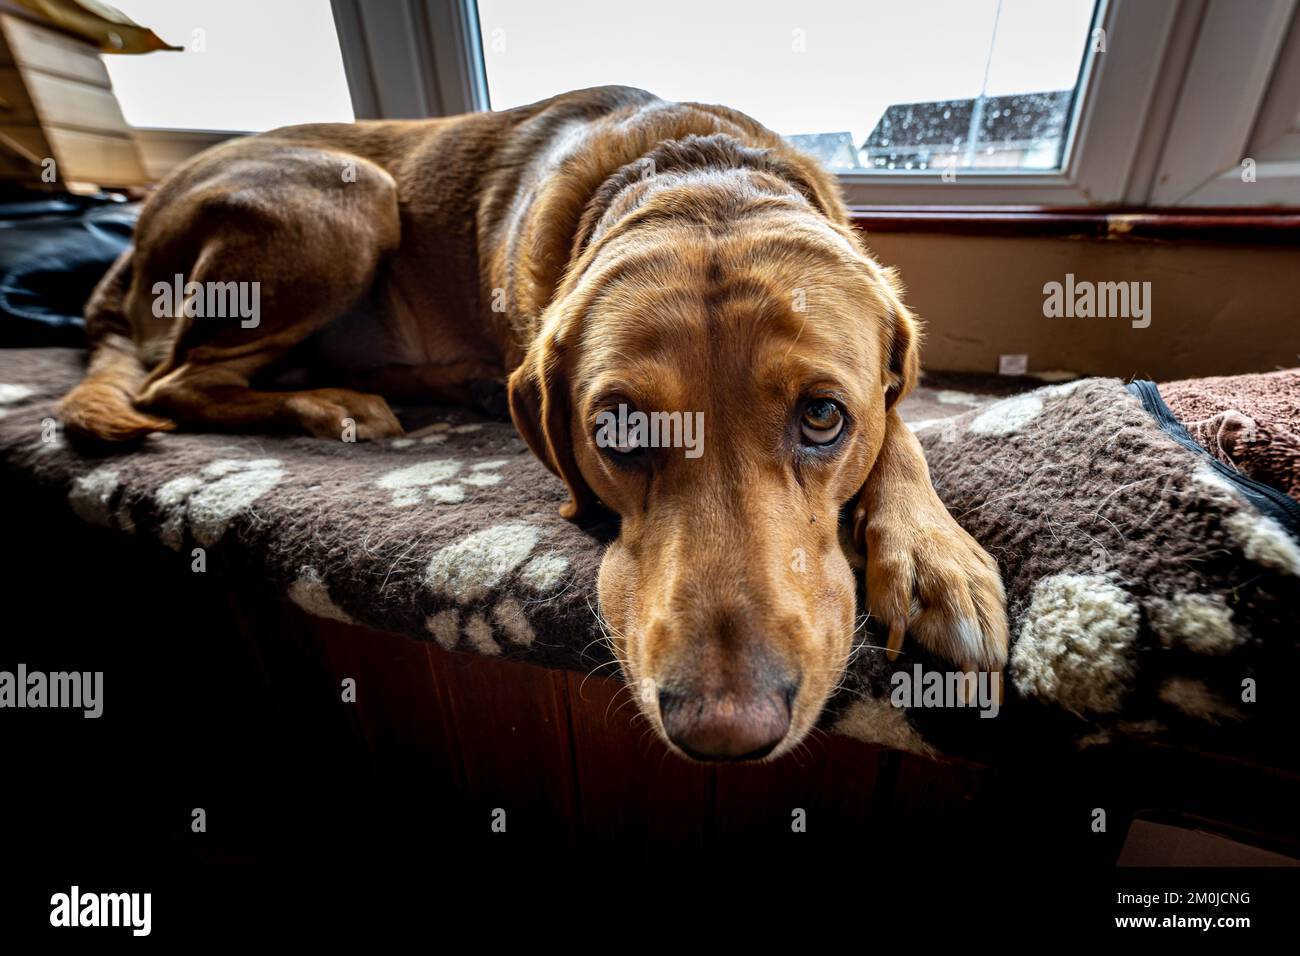 A close-up shot of a brown Tyrolean Hound breed dog, Tiroler Bracke, laying on a couch Stock Photo